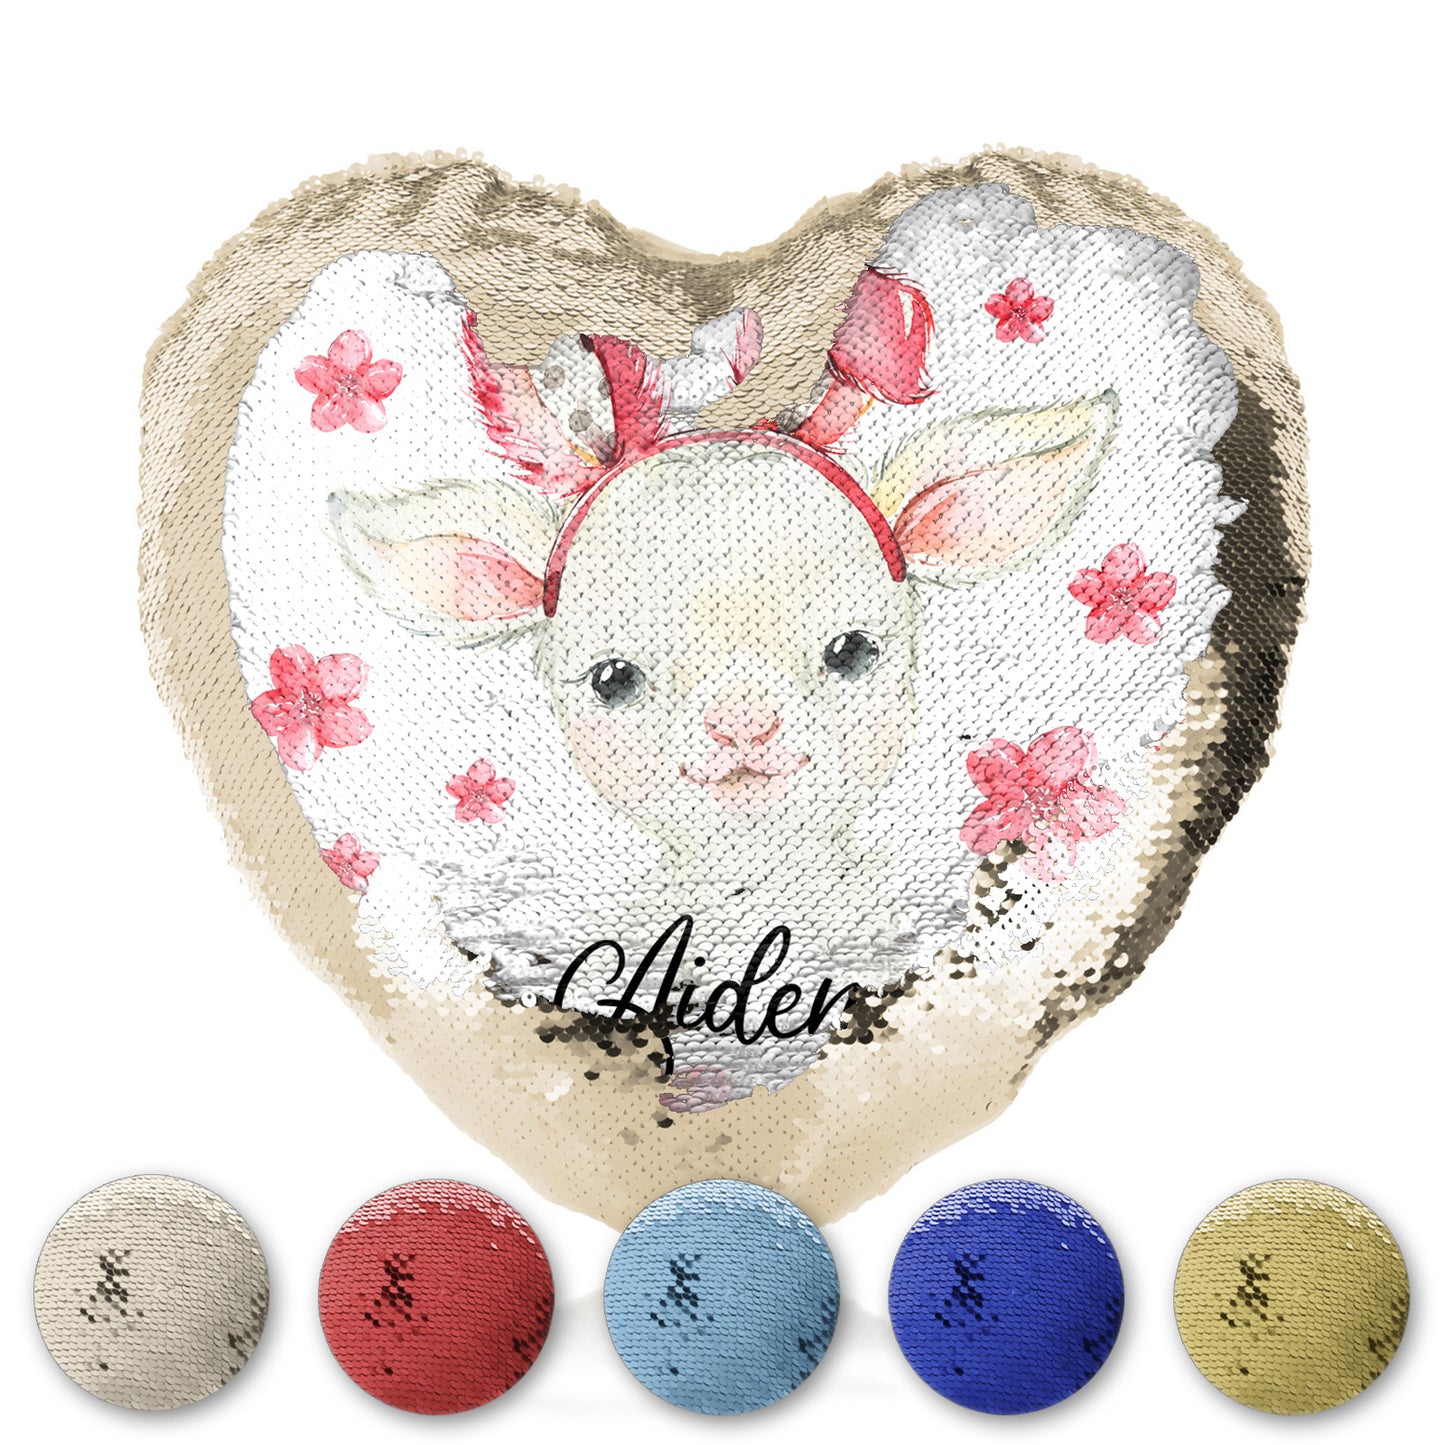 Personalised Sequin Heart Cushion with White Lamb Pink Bunny Ears and Flowers and Cute Text